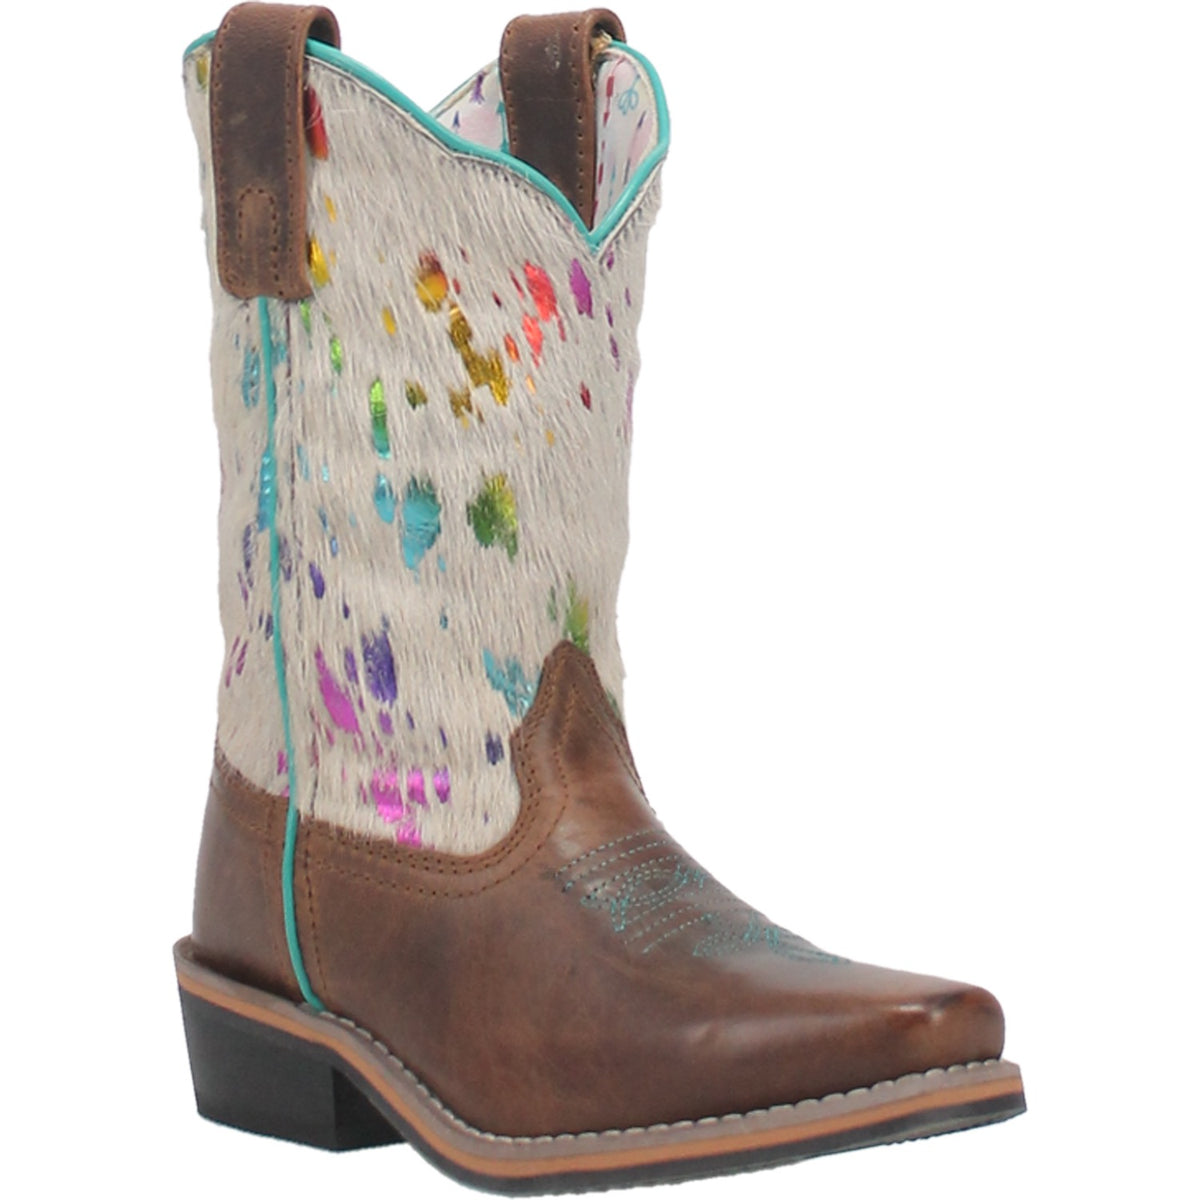 RUMI LEATHER YOUTH BOOT Cover